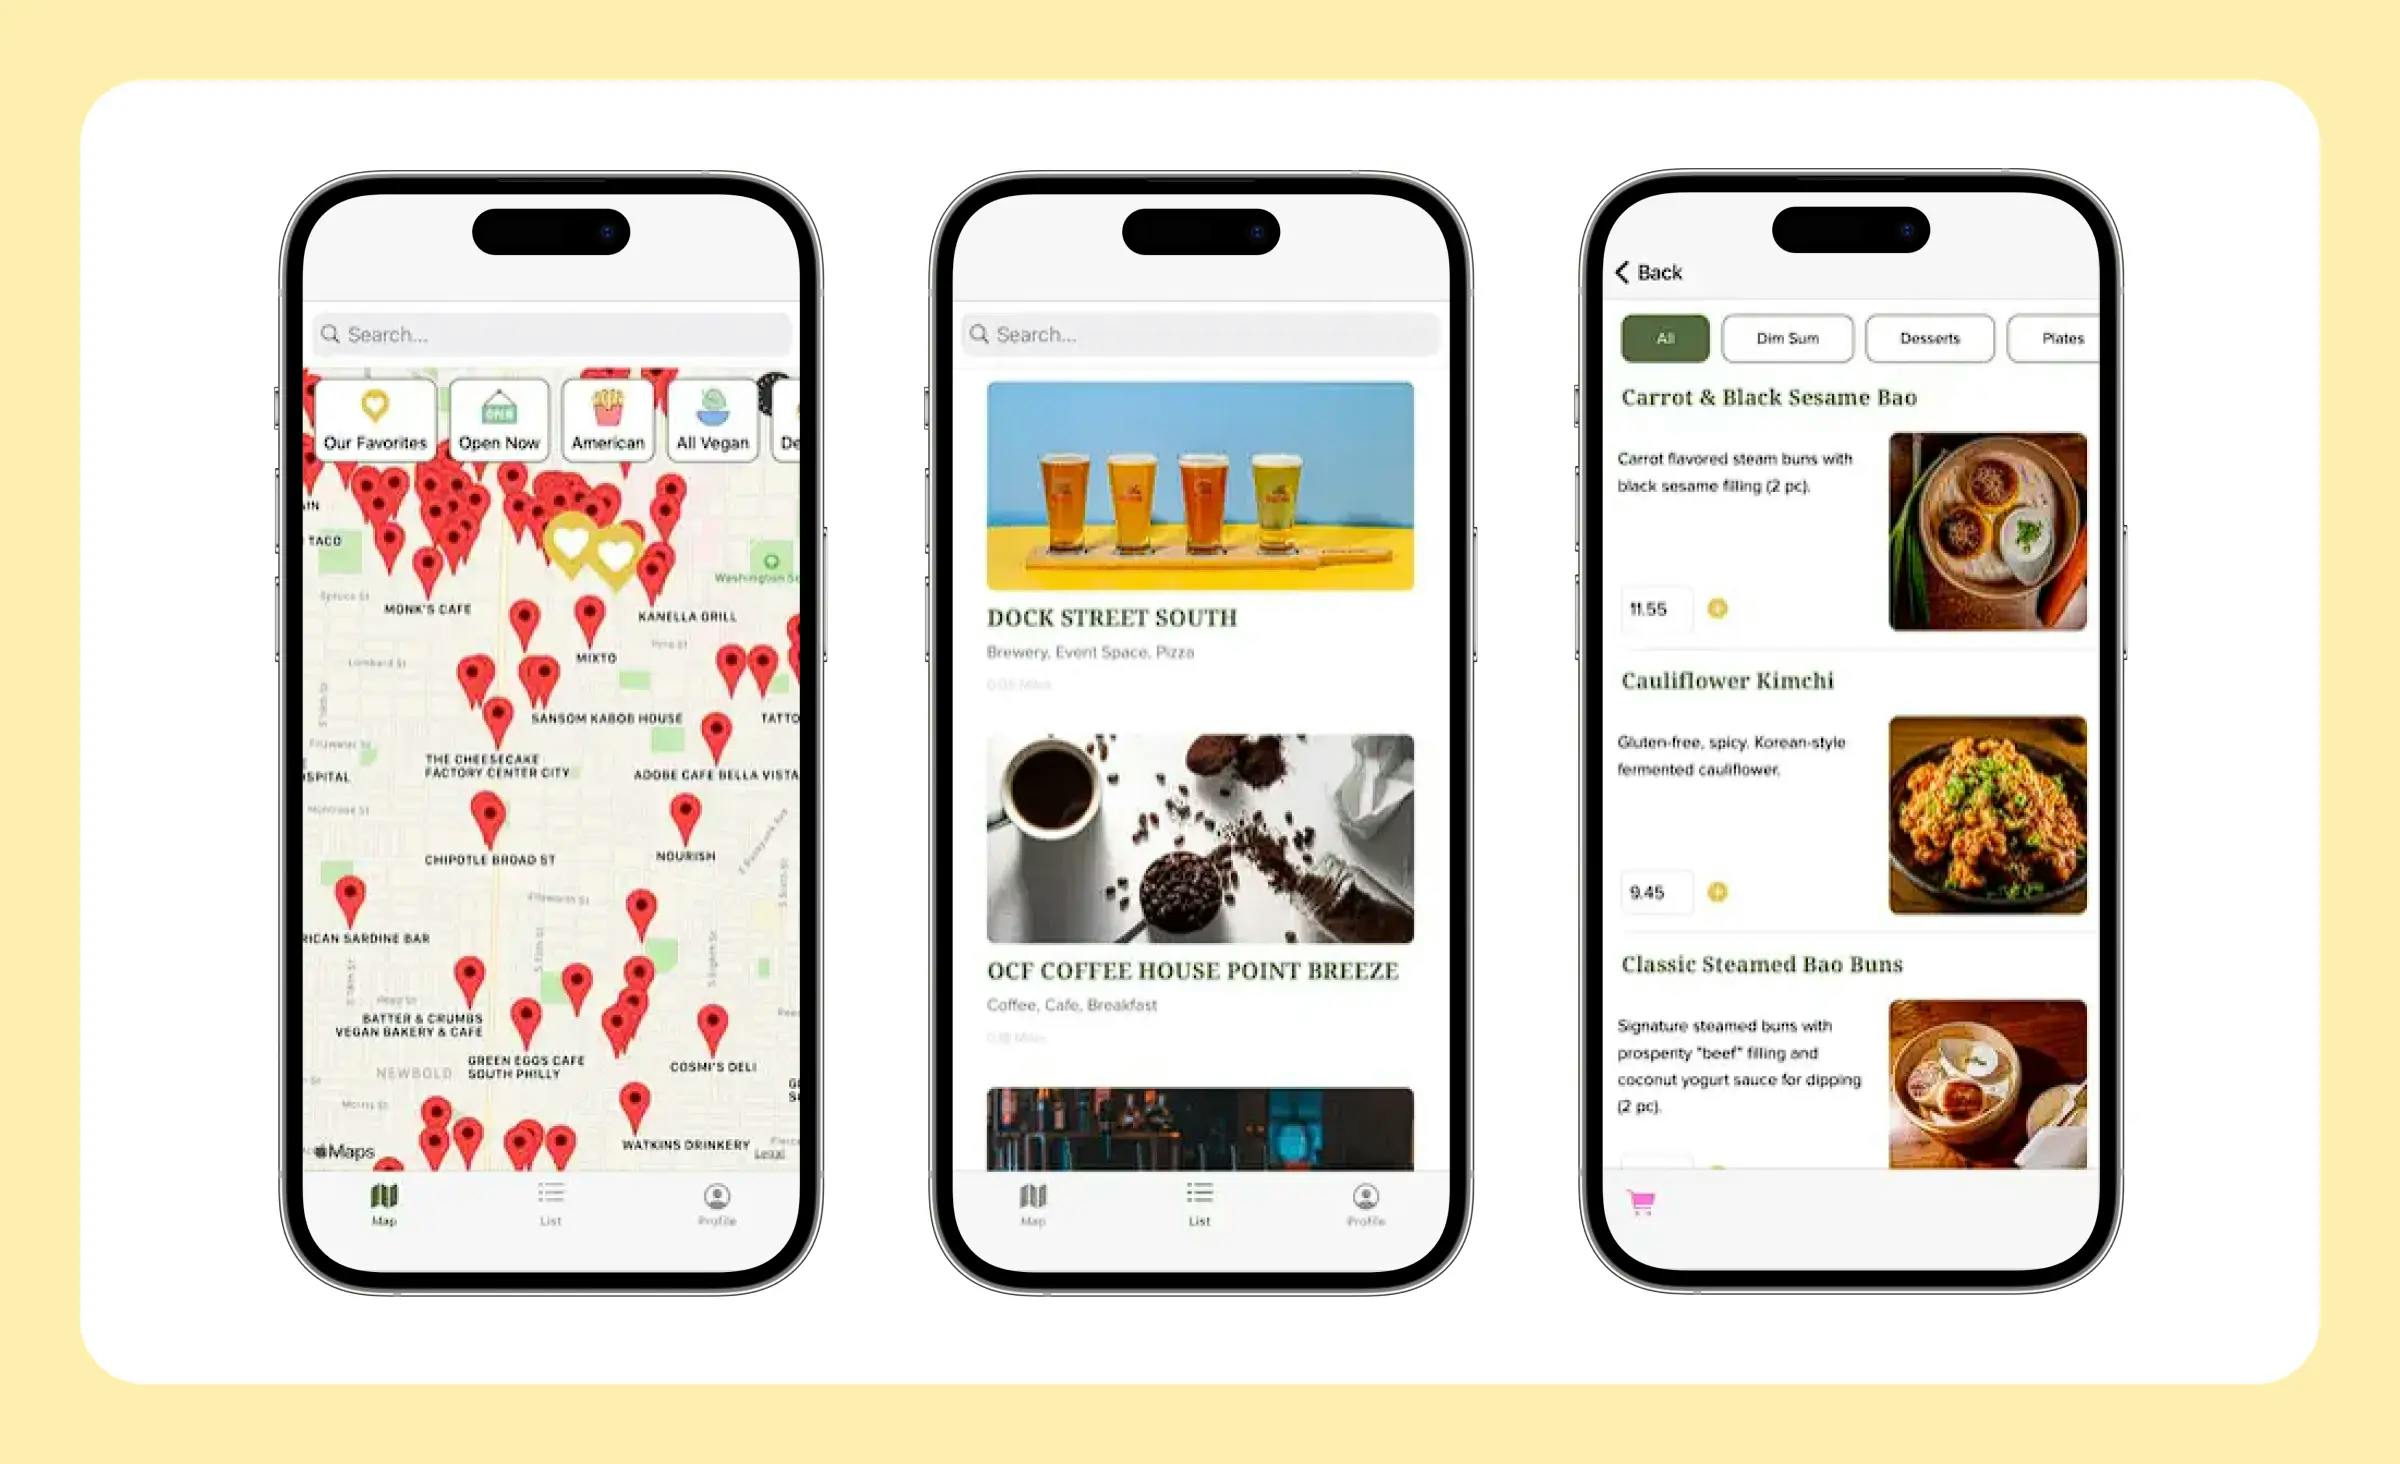 The image displays three screens from the Live Better application for vegans: a map indicating available restaurants, a list of restaurants, and a menu. This is a suitable illustration of on-demand food delivery app development.